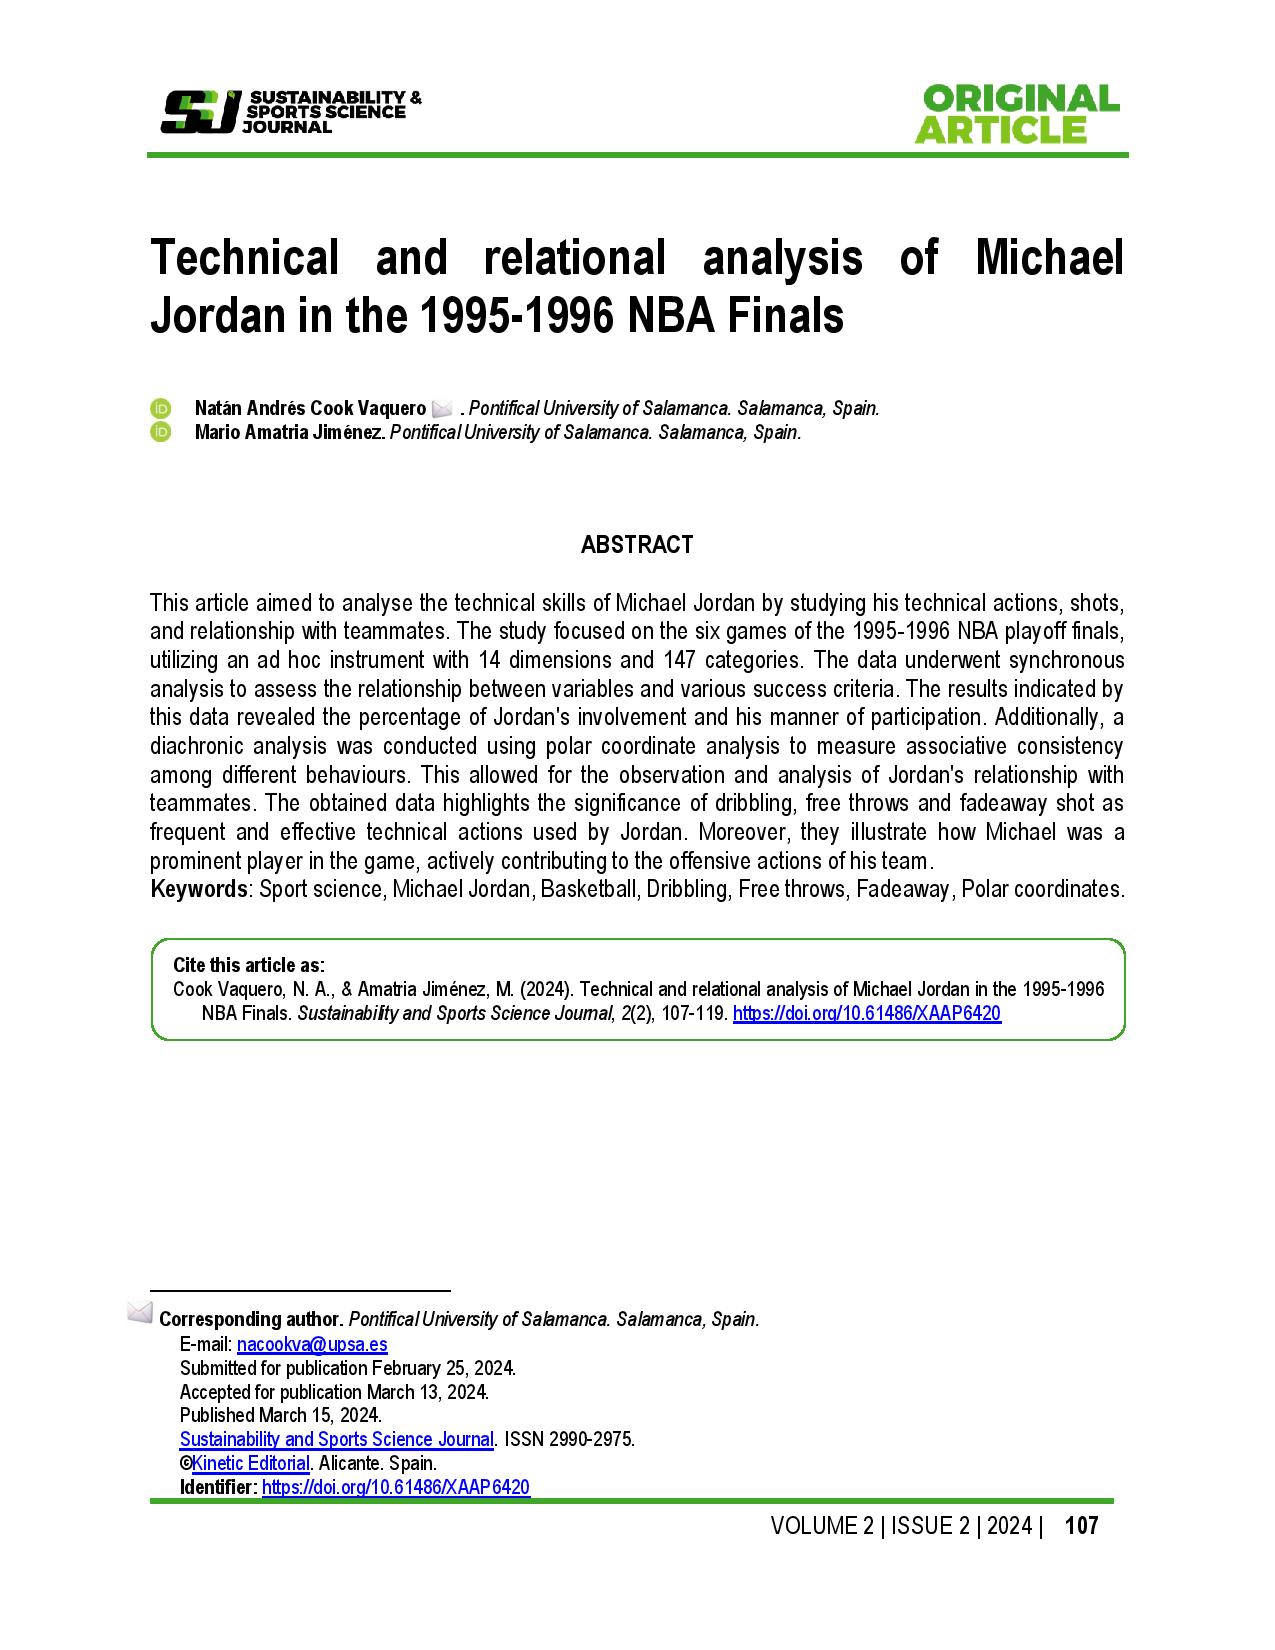 Technical and relational analysis of Michael Jordan in the 1995-1996 NBA Finals